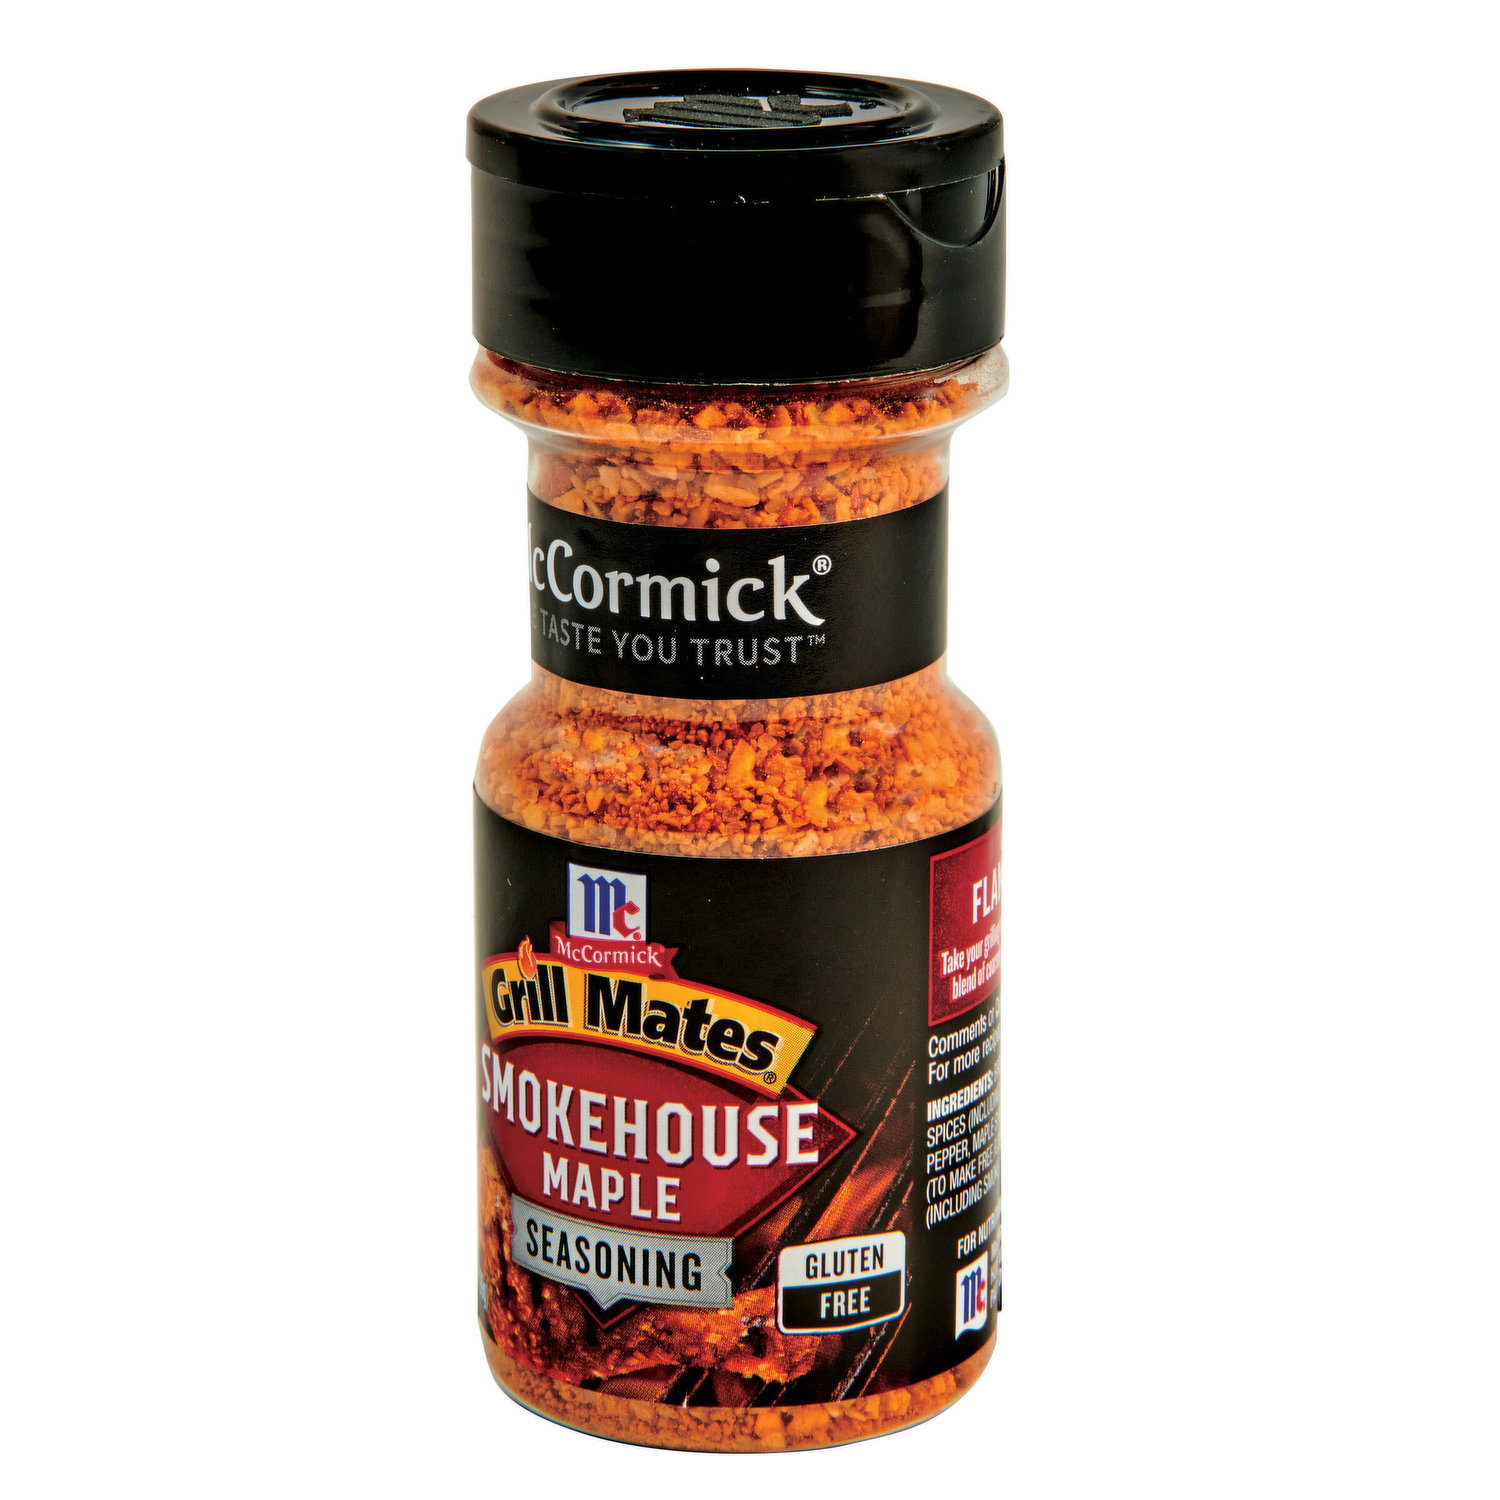 McCormick Grill Mates 2.5 oz, Mixed Spices & Seasonings { Select Flavors }